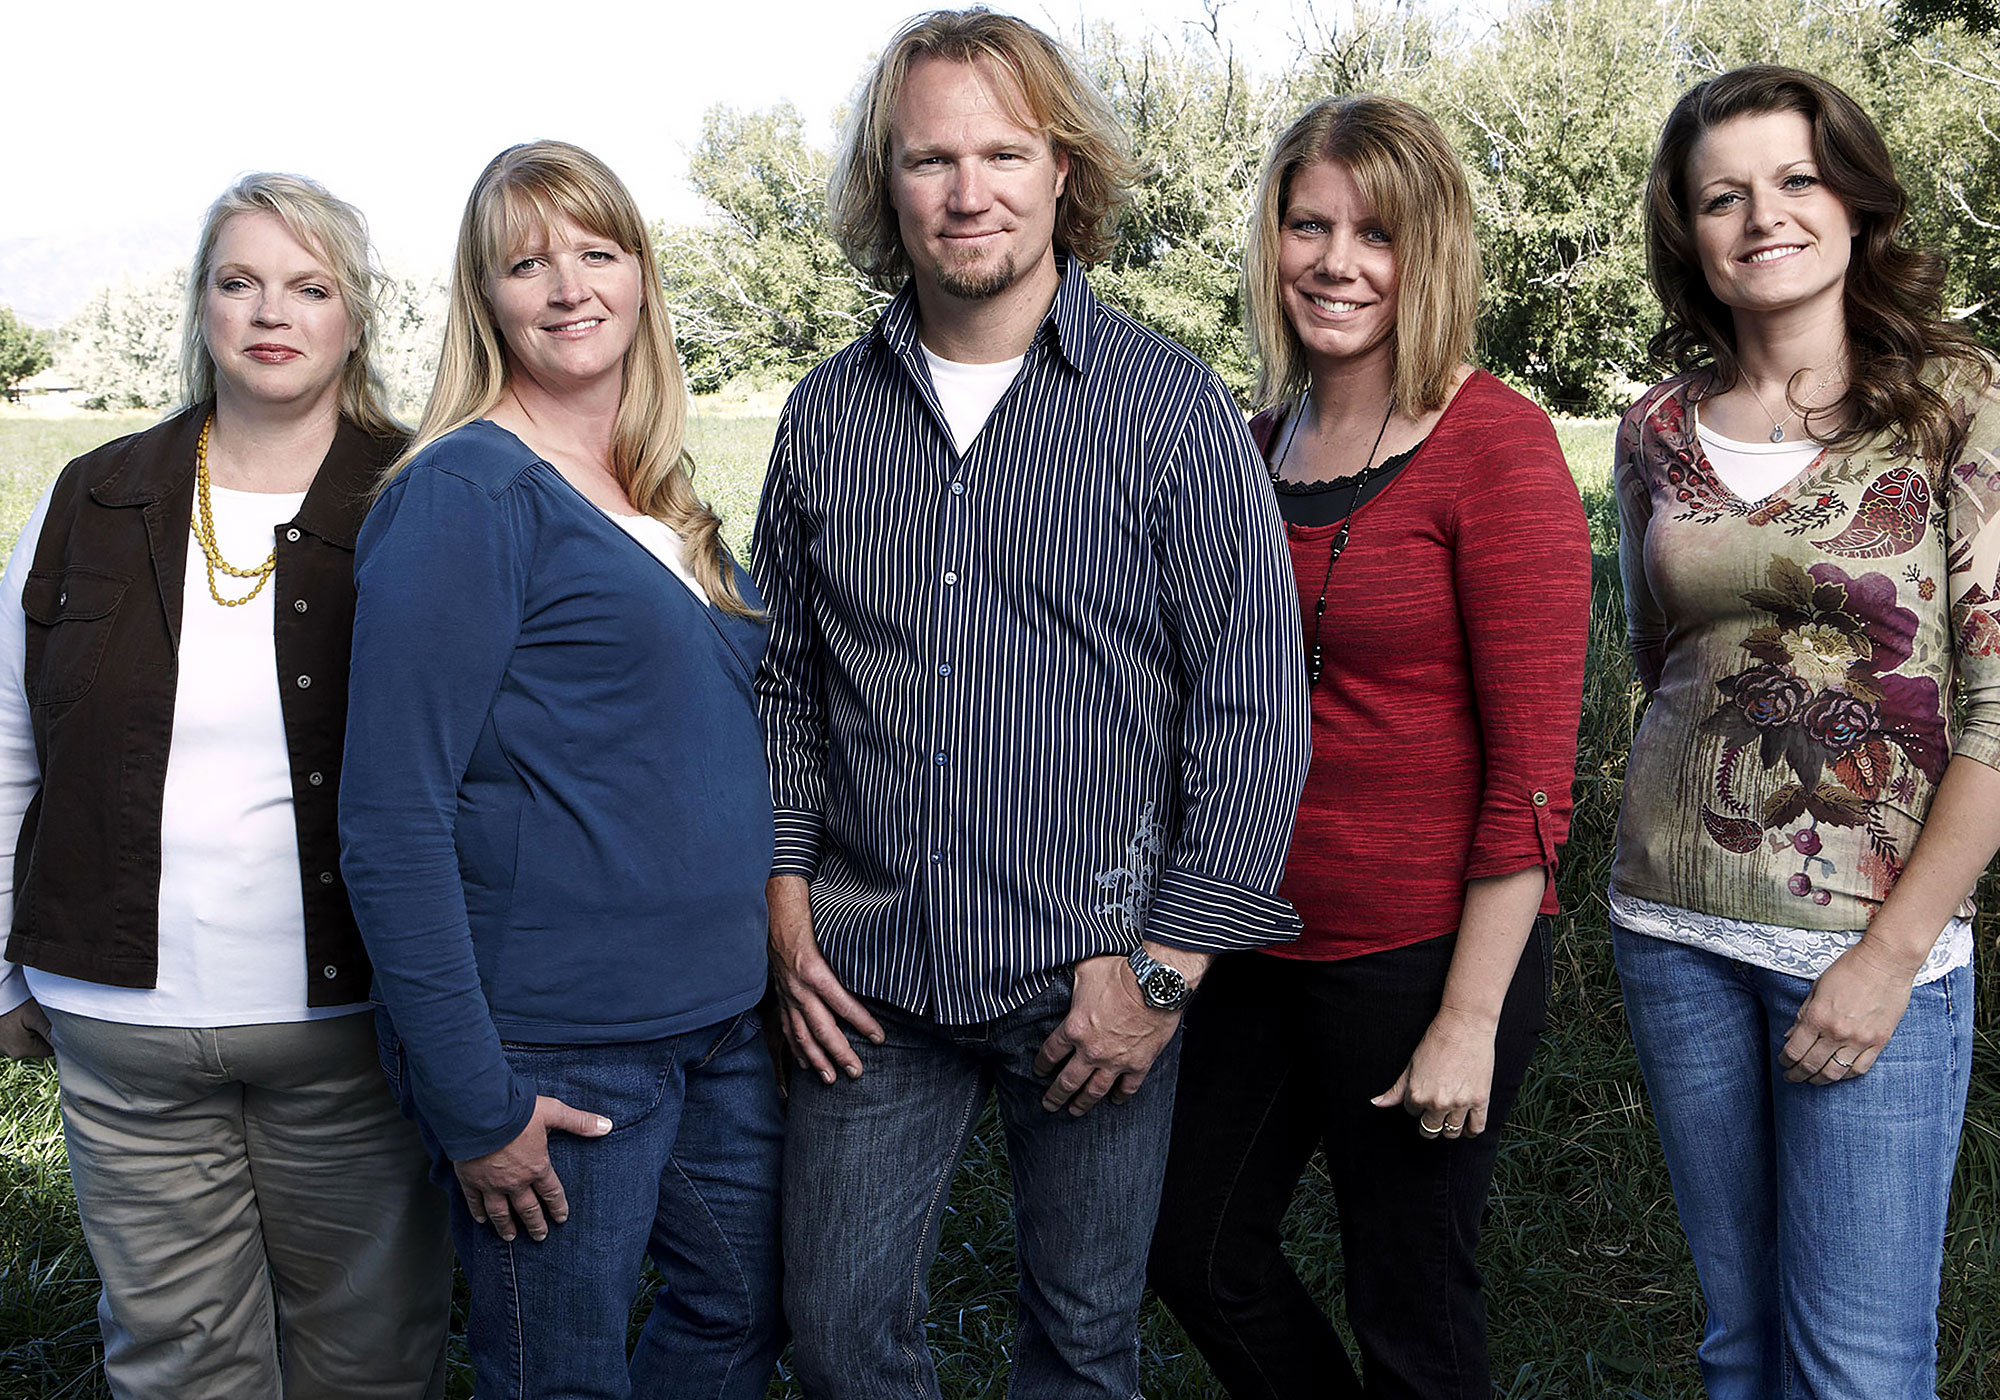 Sister Wives Tell-All Kody Brown, Meri Discuss Sex, Cheating, More